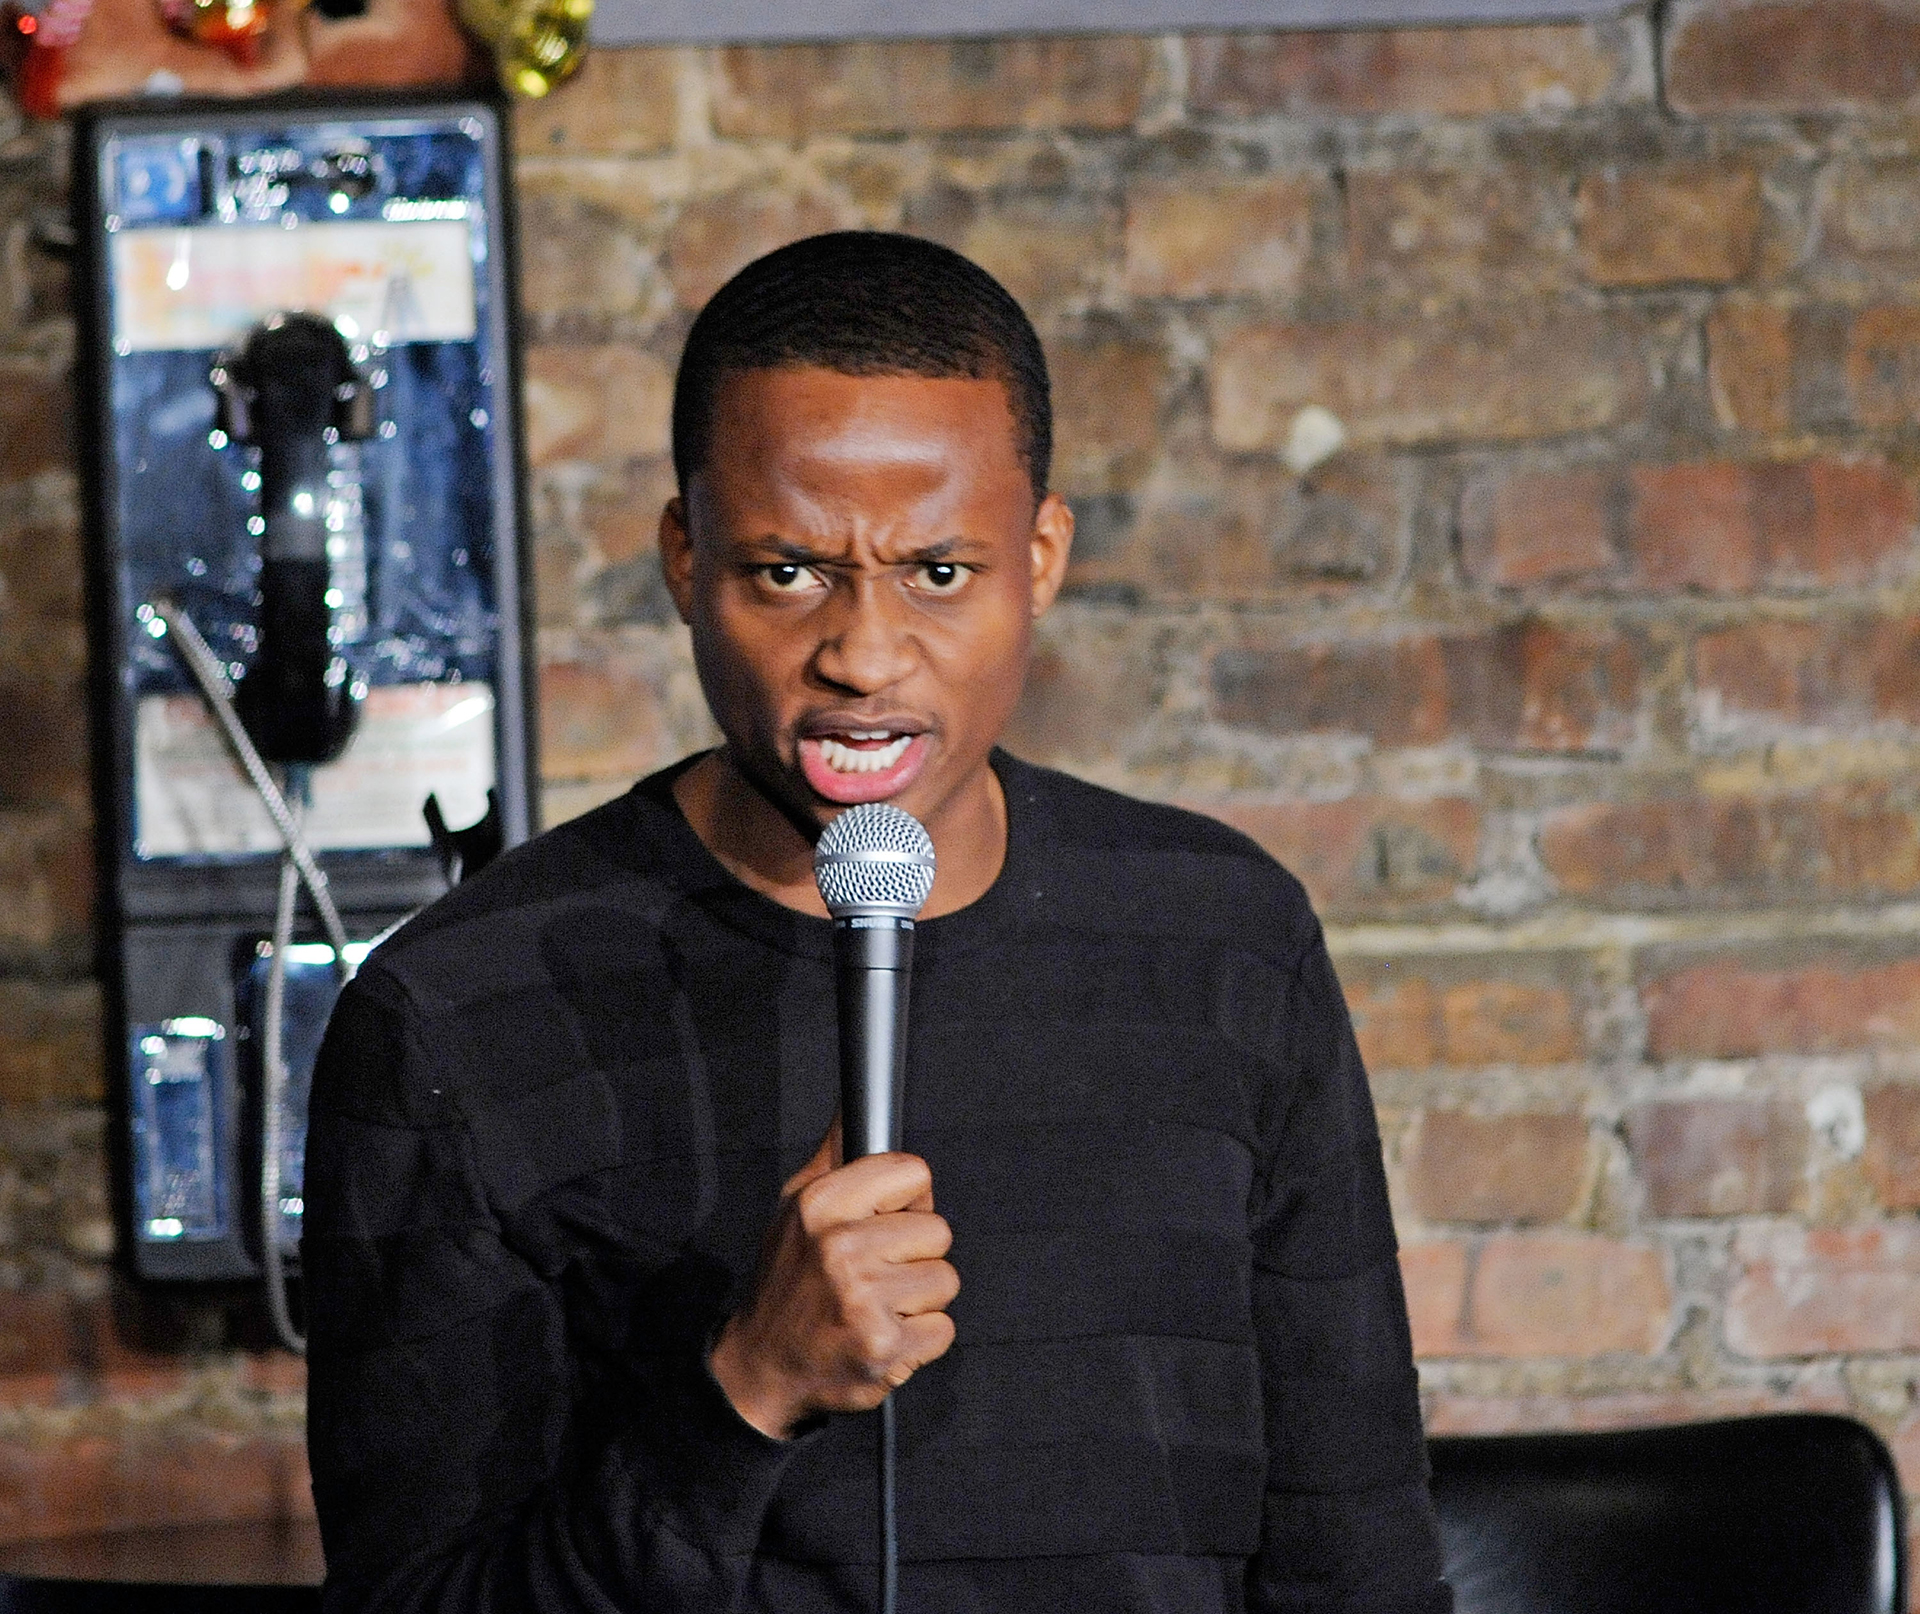 Nore Davis performs at The Stress Factory Comedy Club on December 8, 2012 in New Brunswick, New Jersey.